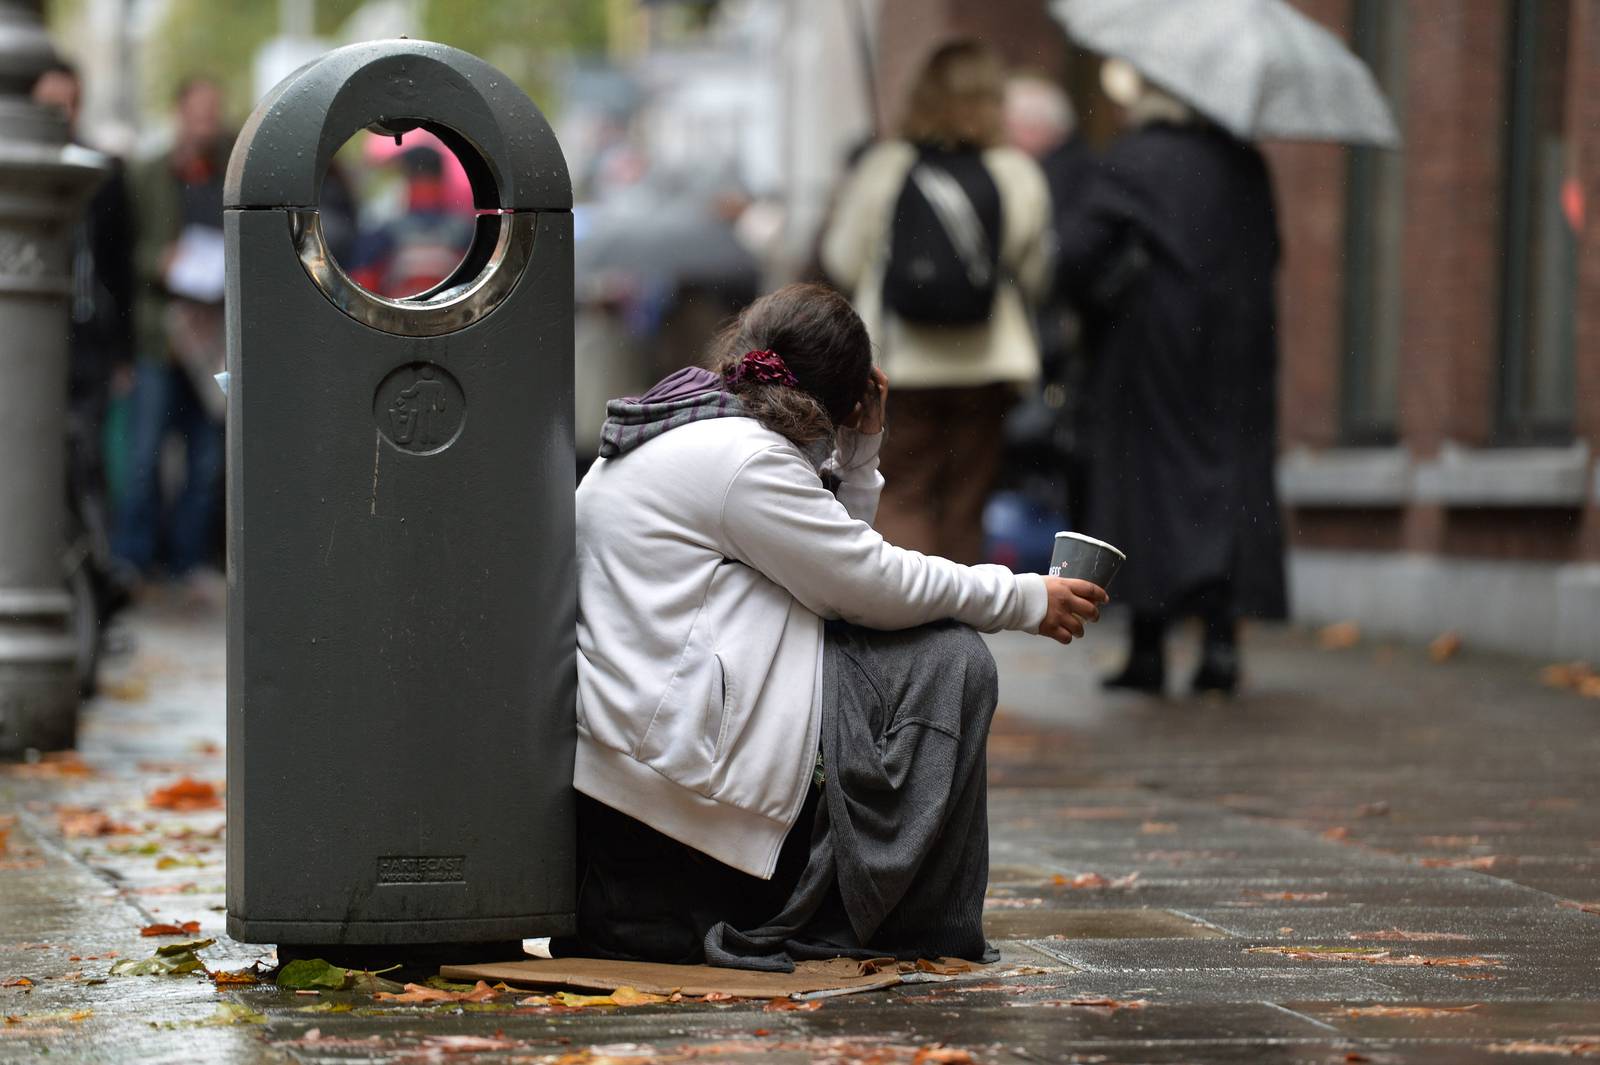 22/10/2013 NEWS/ FEATURES Begging story
A young woman  with a paper cup waiting for  spare change in Dublin.
Photograph: Cyril Byrne / THE IRISH TIMES